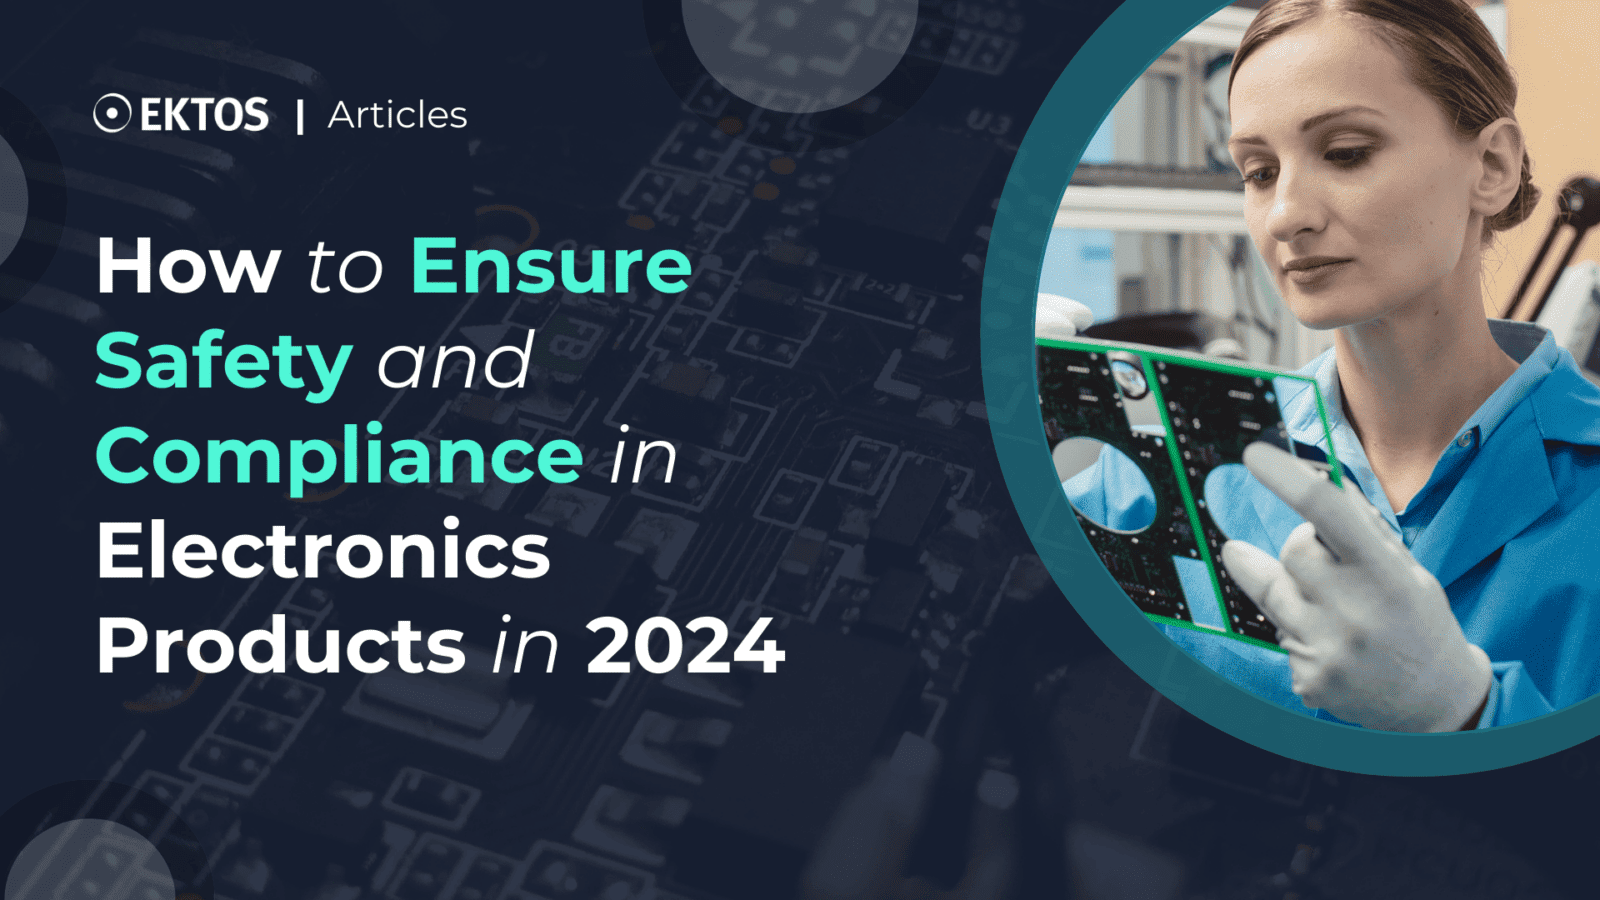 How To Ensure Safety and Compliance in Electronic Products in 2024